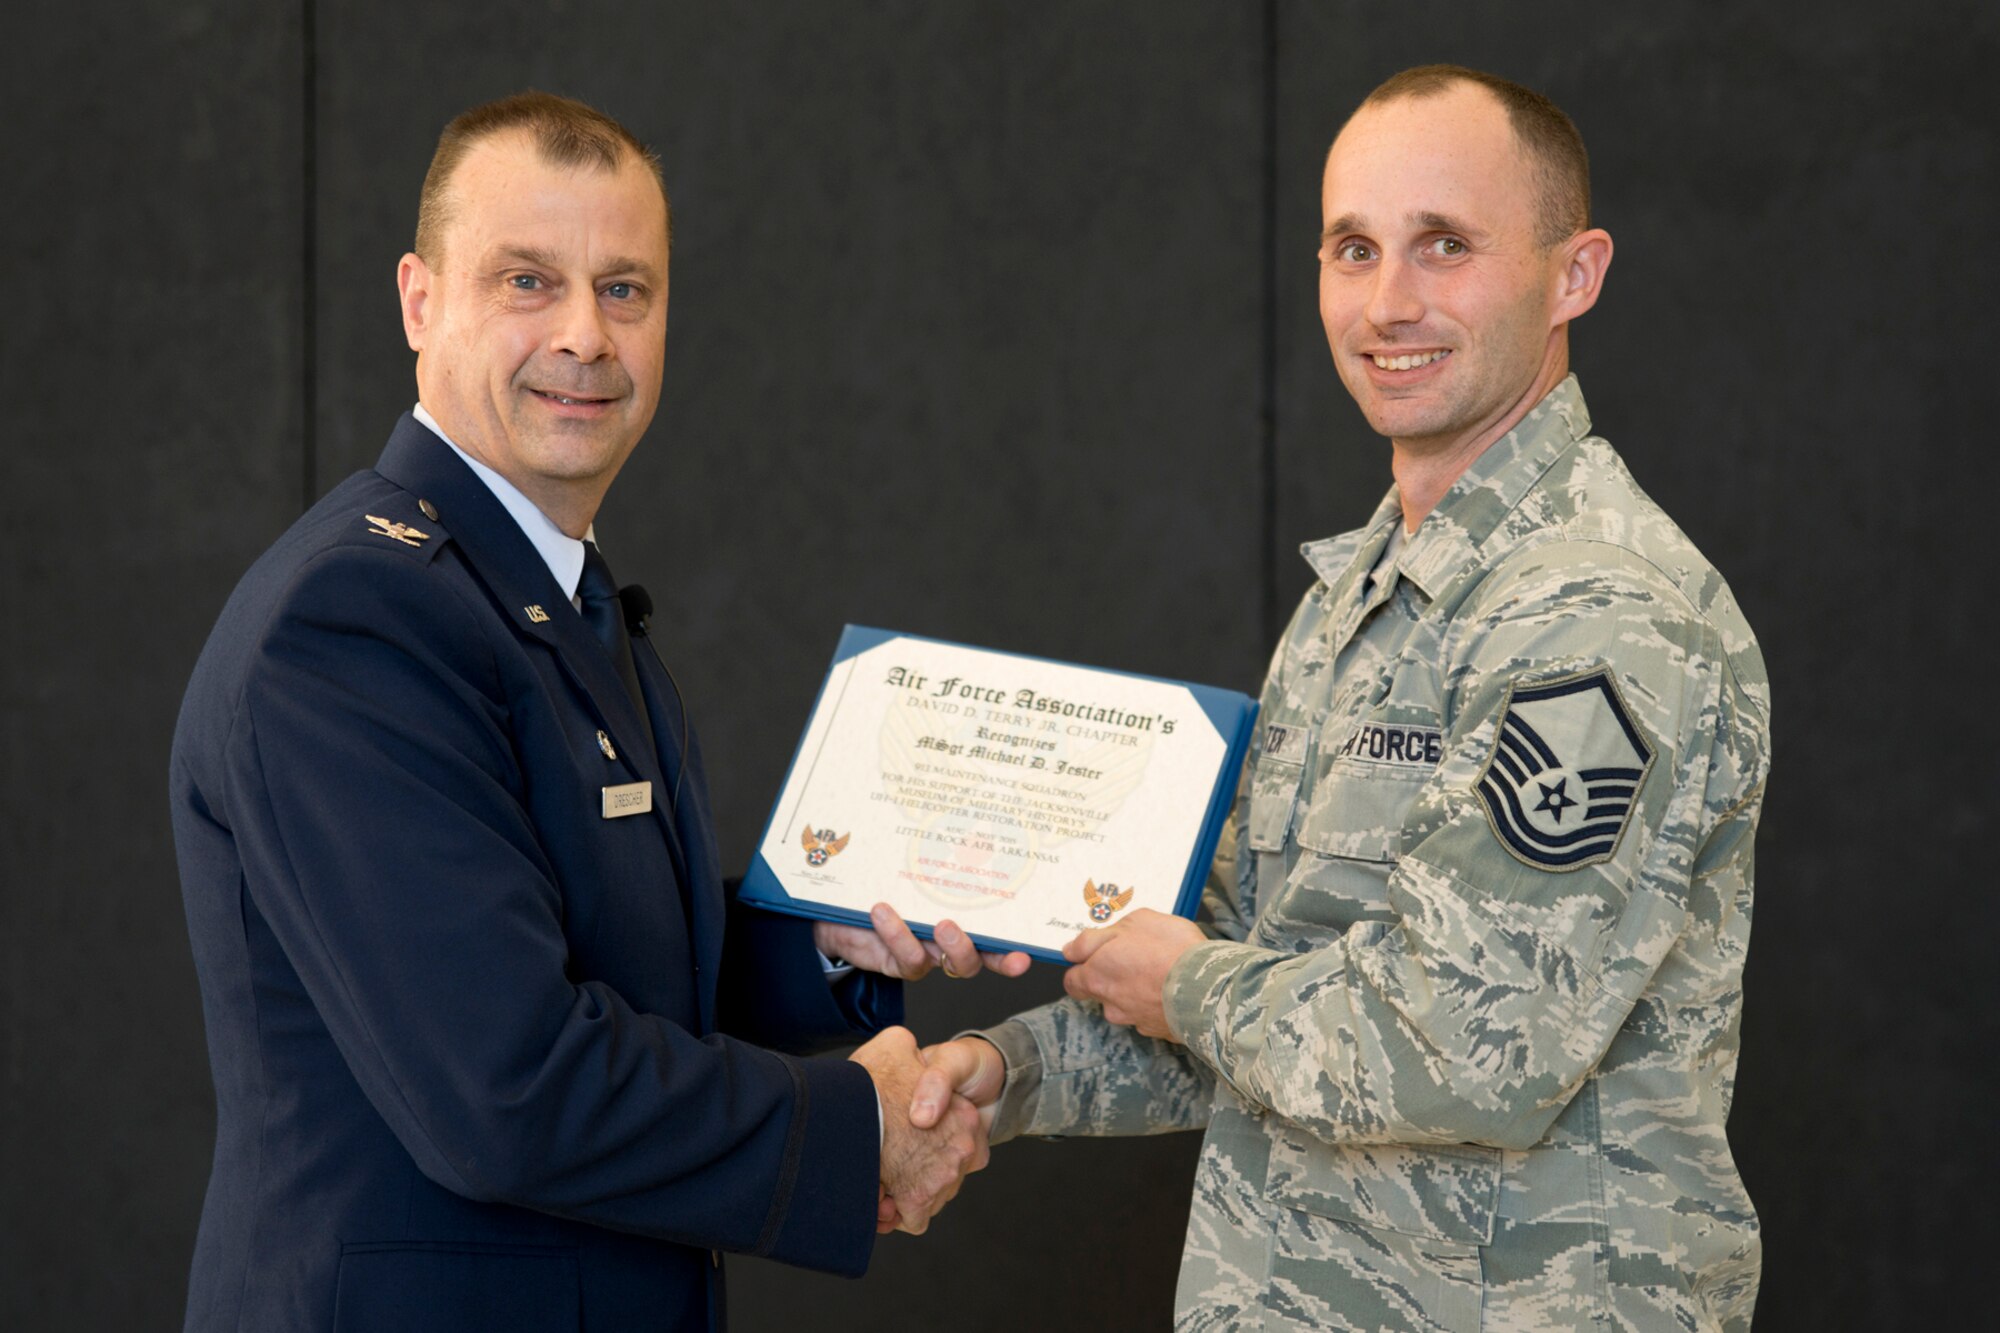 U.S. Air Force Col. Craig Drescher, commander, 913th Airlift Group, and Master Sgt. Michael Jester, fabrication flight chief, 913th Maintenance Squadron, pose for a photo during Commander’s Call at Little Rock Air Force Base, Ark., Dec. 6, 2015. Jester was one of ten individuals from the 913th AG who helped restore a Vietnam era chopper for the Jacksonville Museum of Military History and received a certificate from the Air Force Association’s David D. Terry Jr. Chapter, recognizing their accomplishment. (U.S. Air Force photo by Master Sgt. Jeff Walston/Released) 